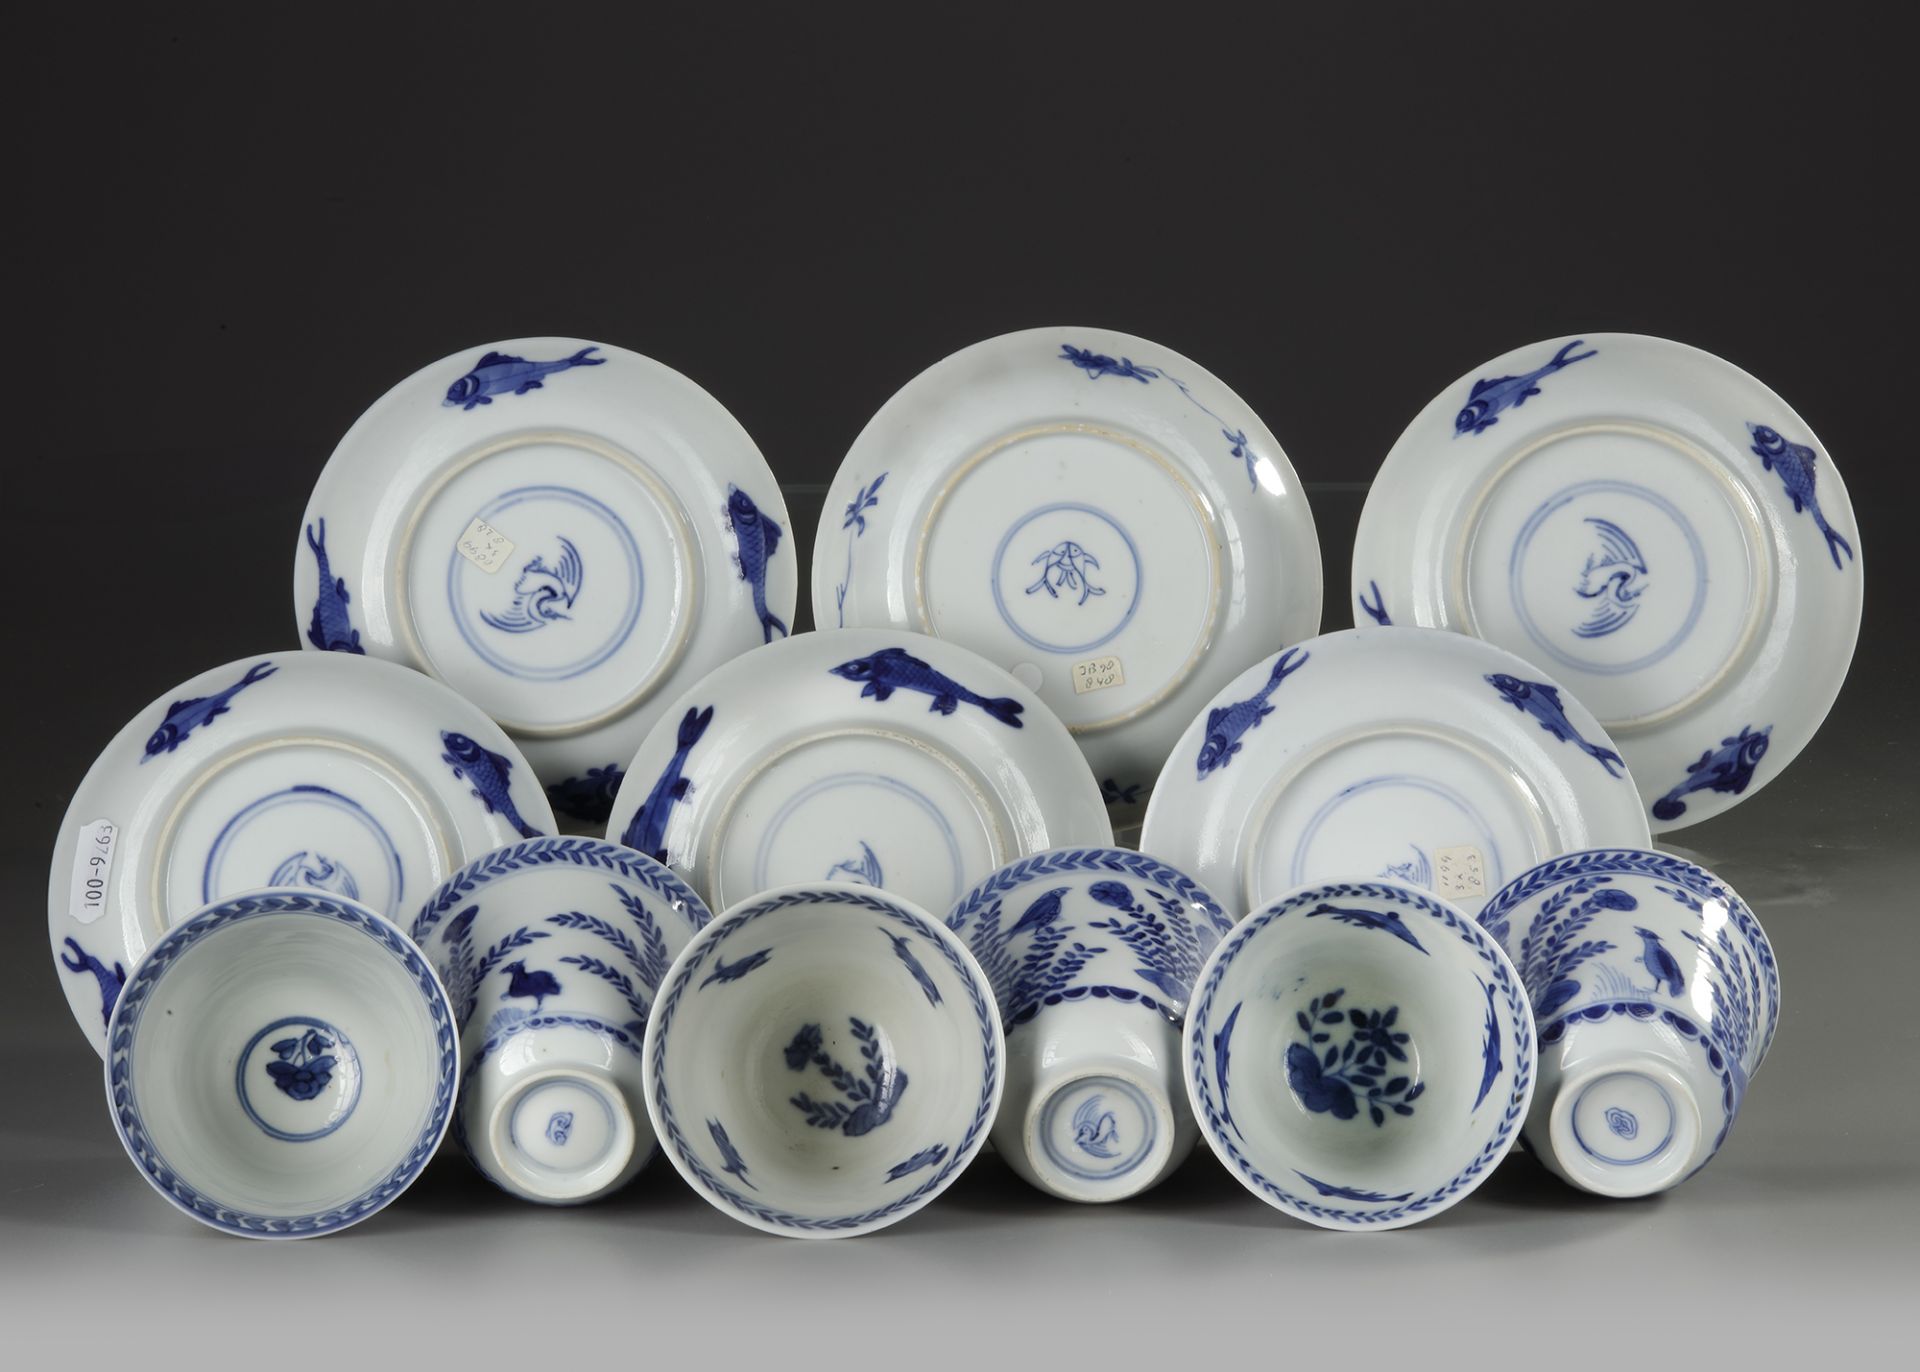 SIX CHINESE BLUE AND WHITE 'CUCKOO IN THE HOUSE' CUPS AND SACUERS, 18TH CENTURY - Image 3 of 3